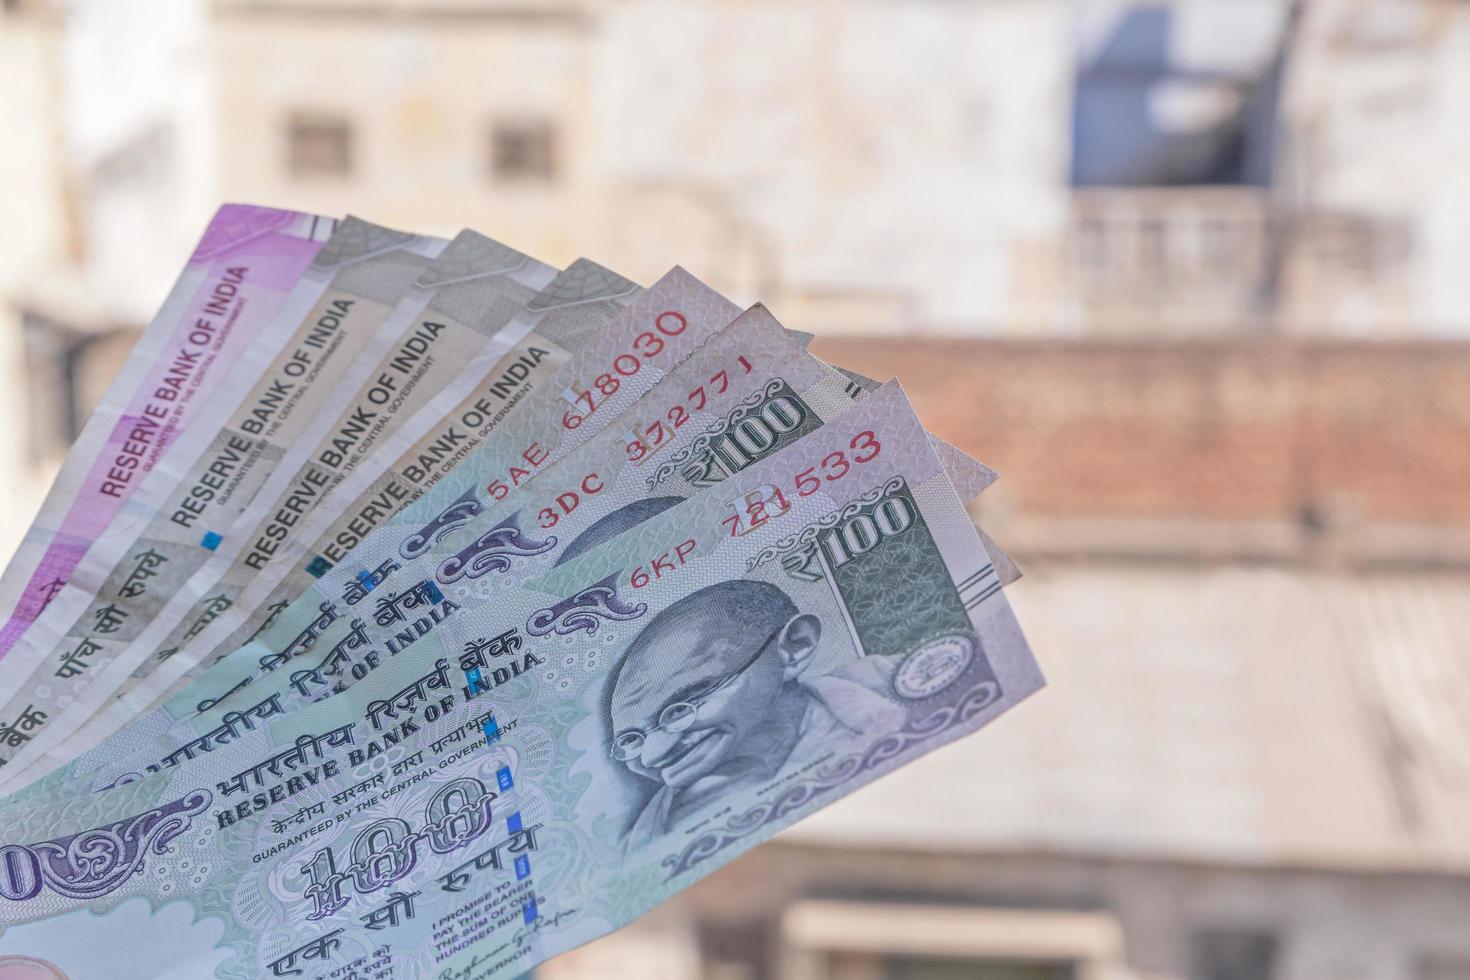 Indian rupee banknotes against old buildings photo